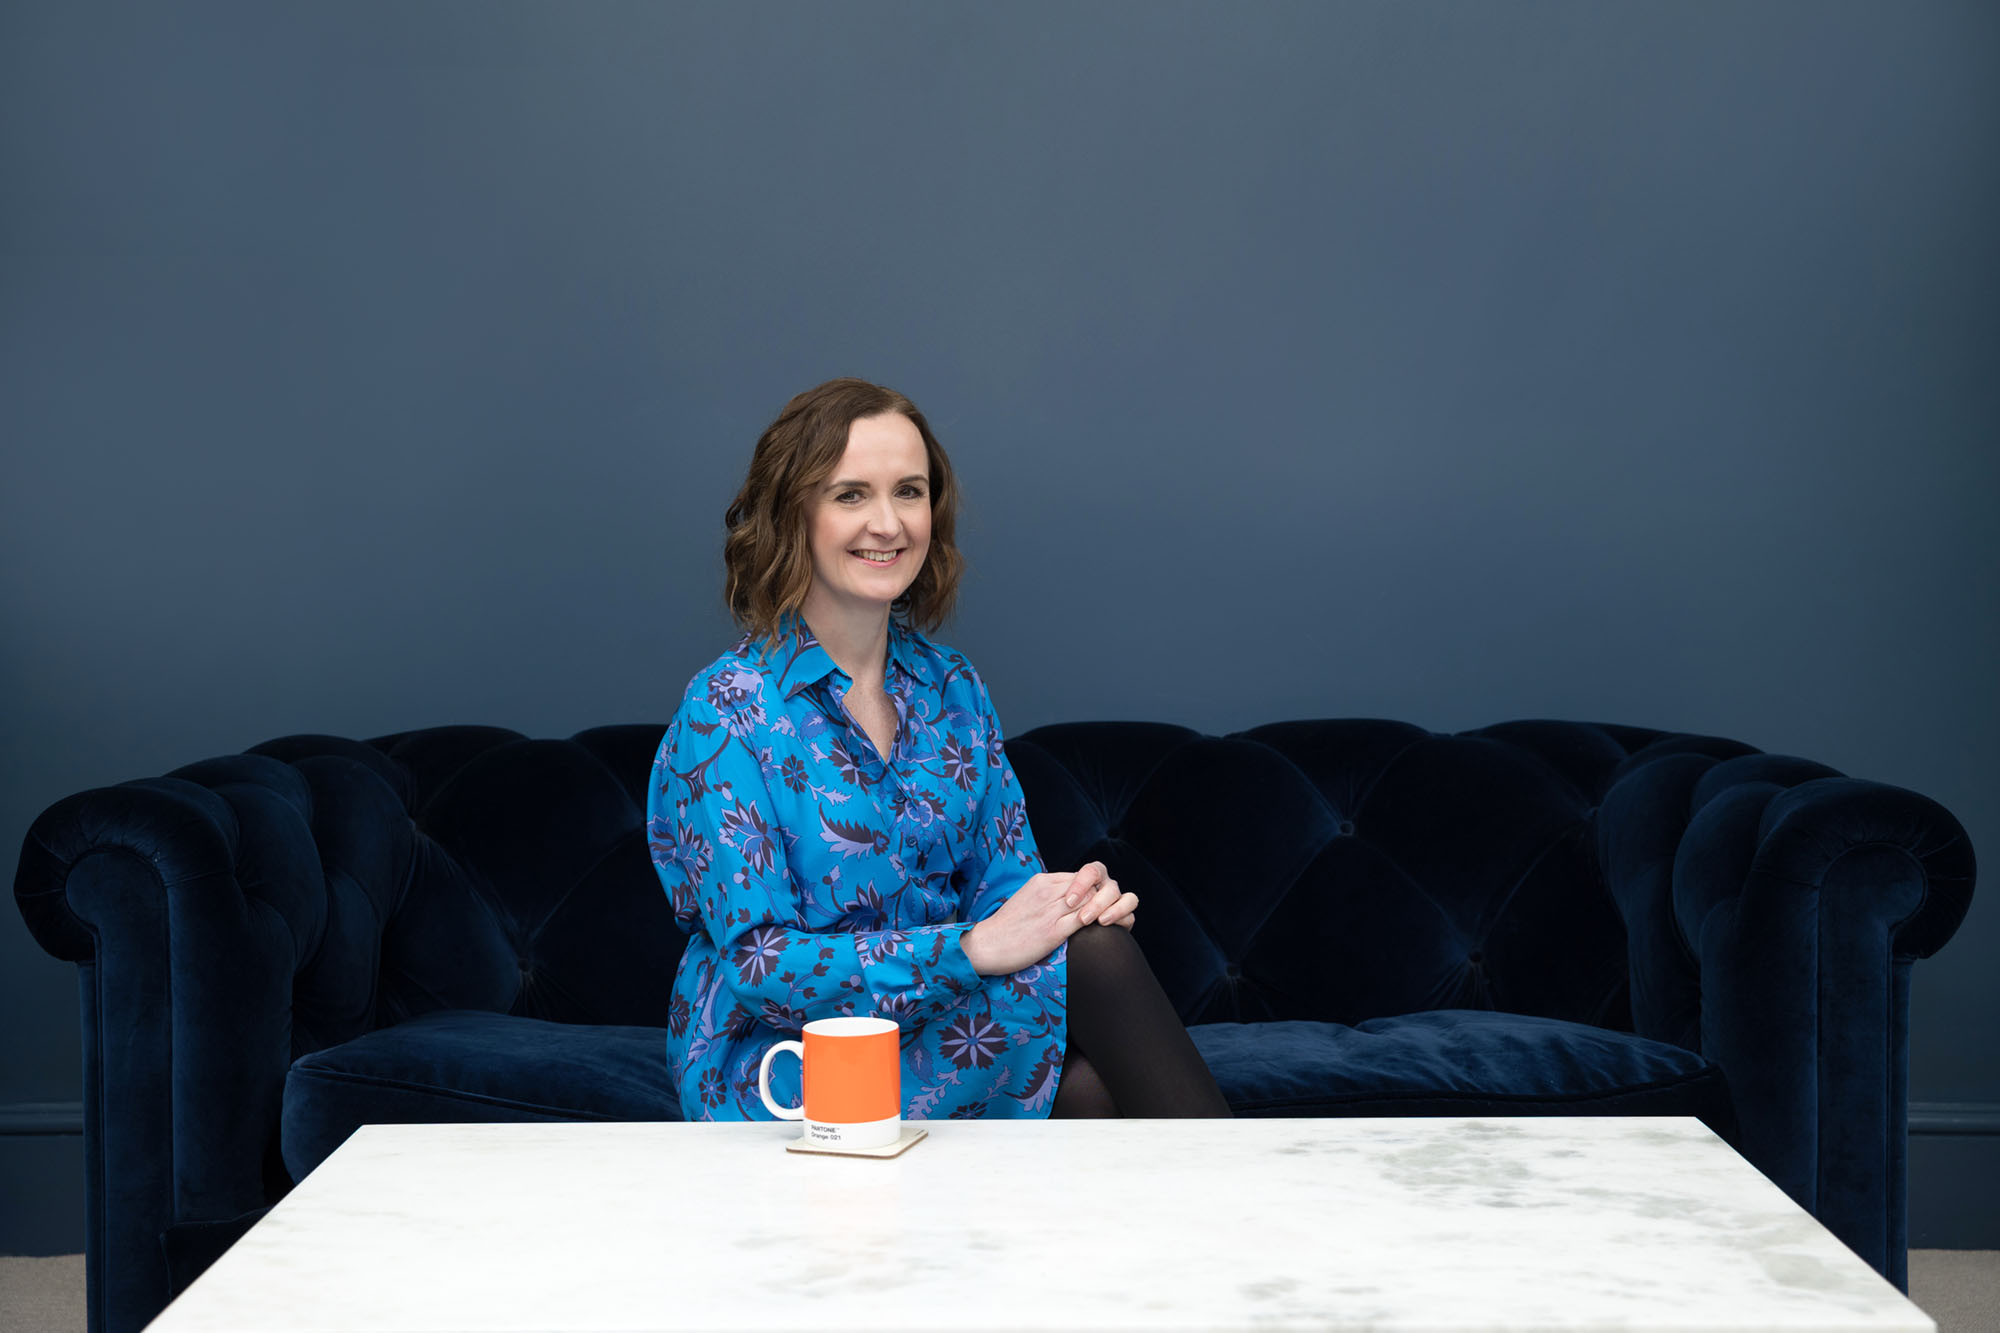 Personal branding photography in Croydon, London & Surrey. A woman sits on a blue sofa in front of a blue wall.